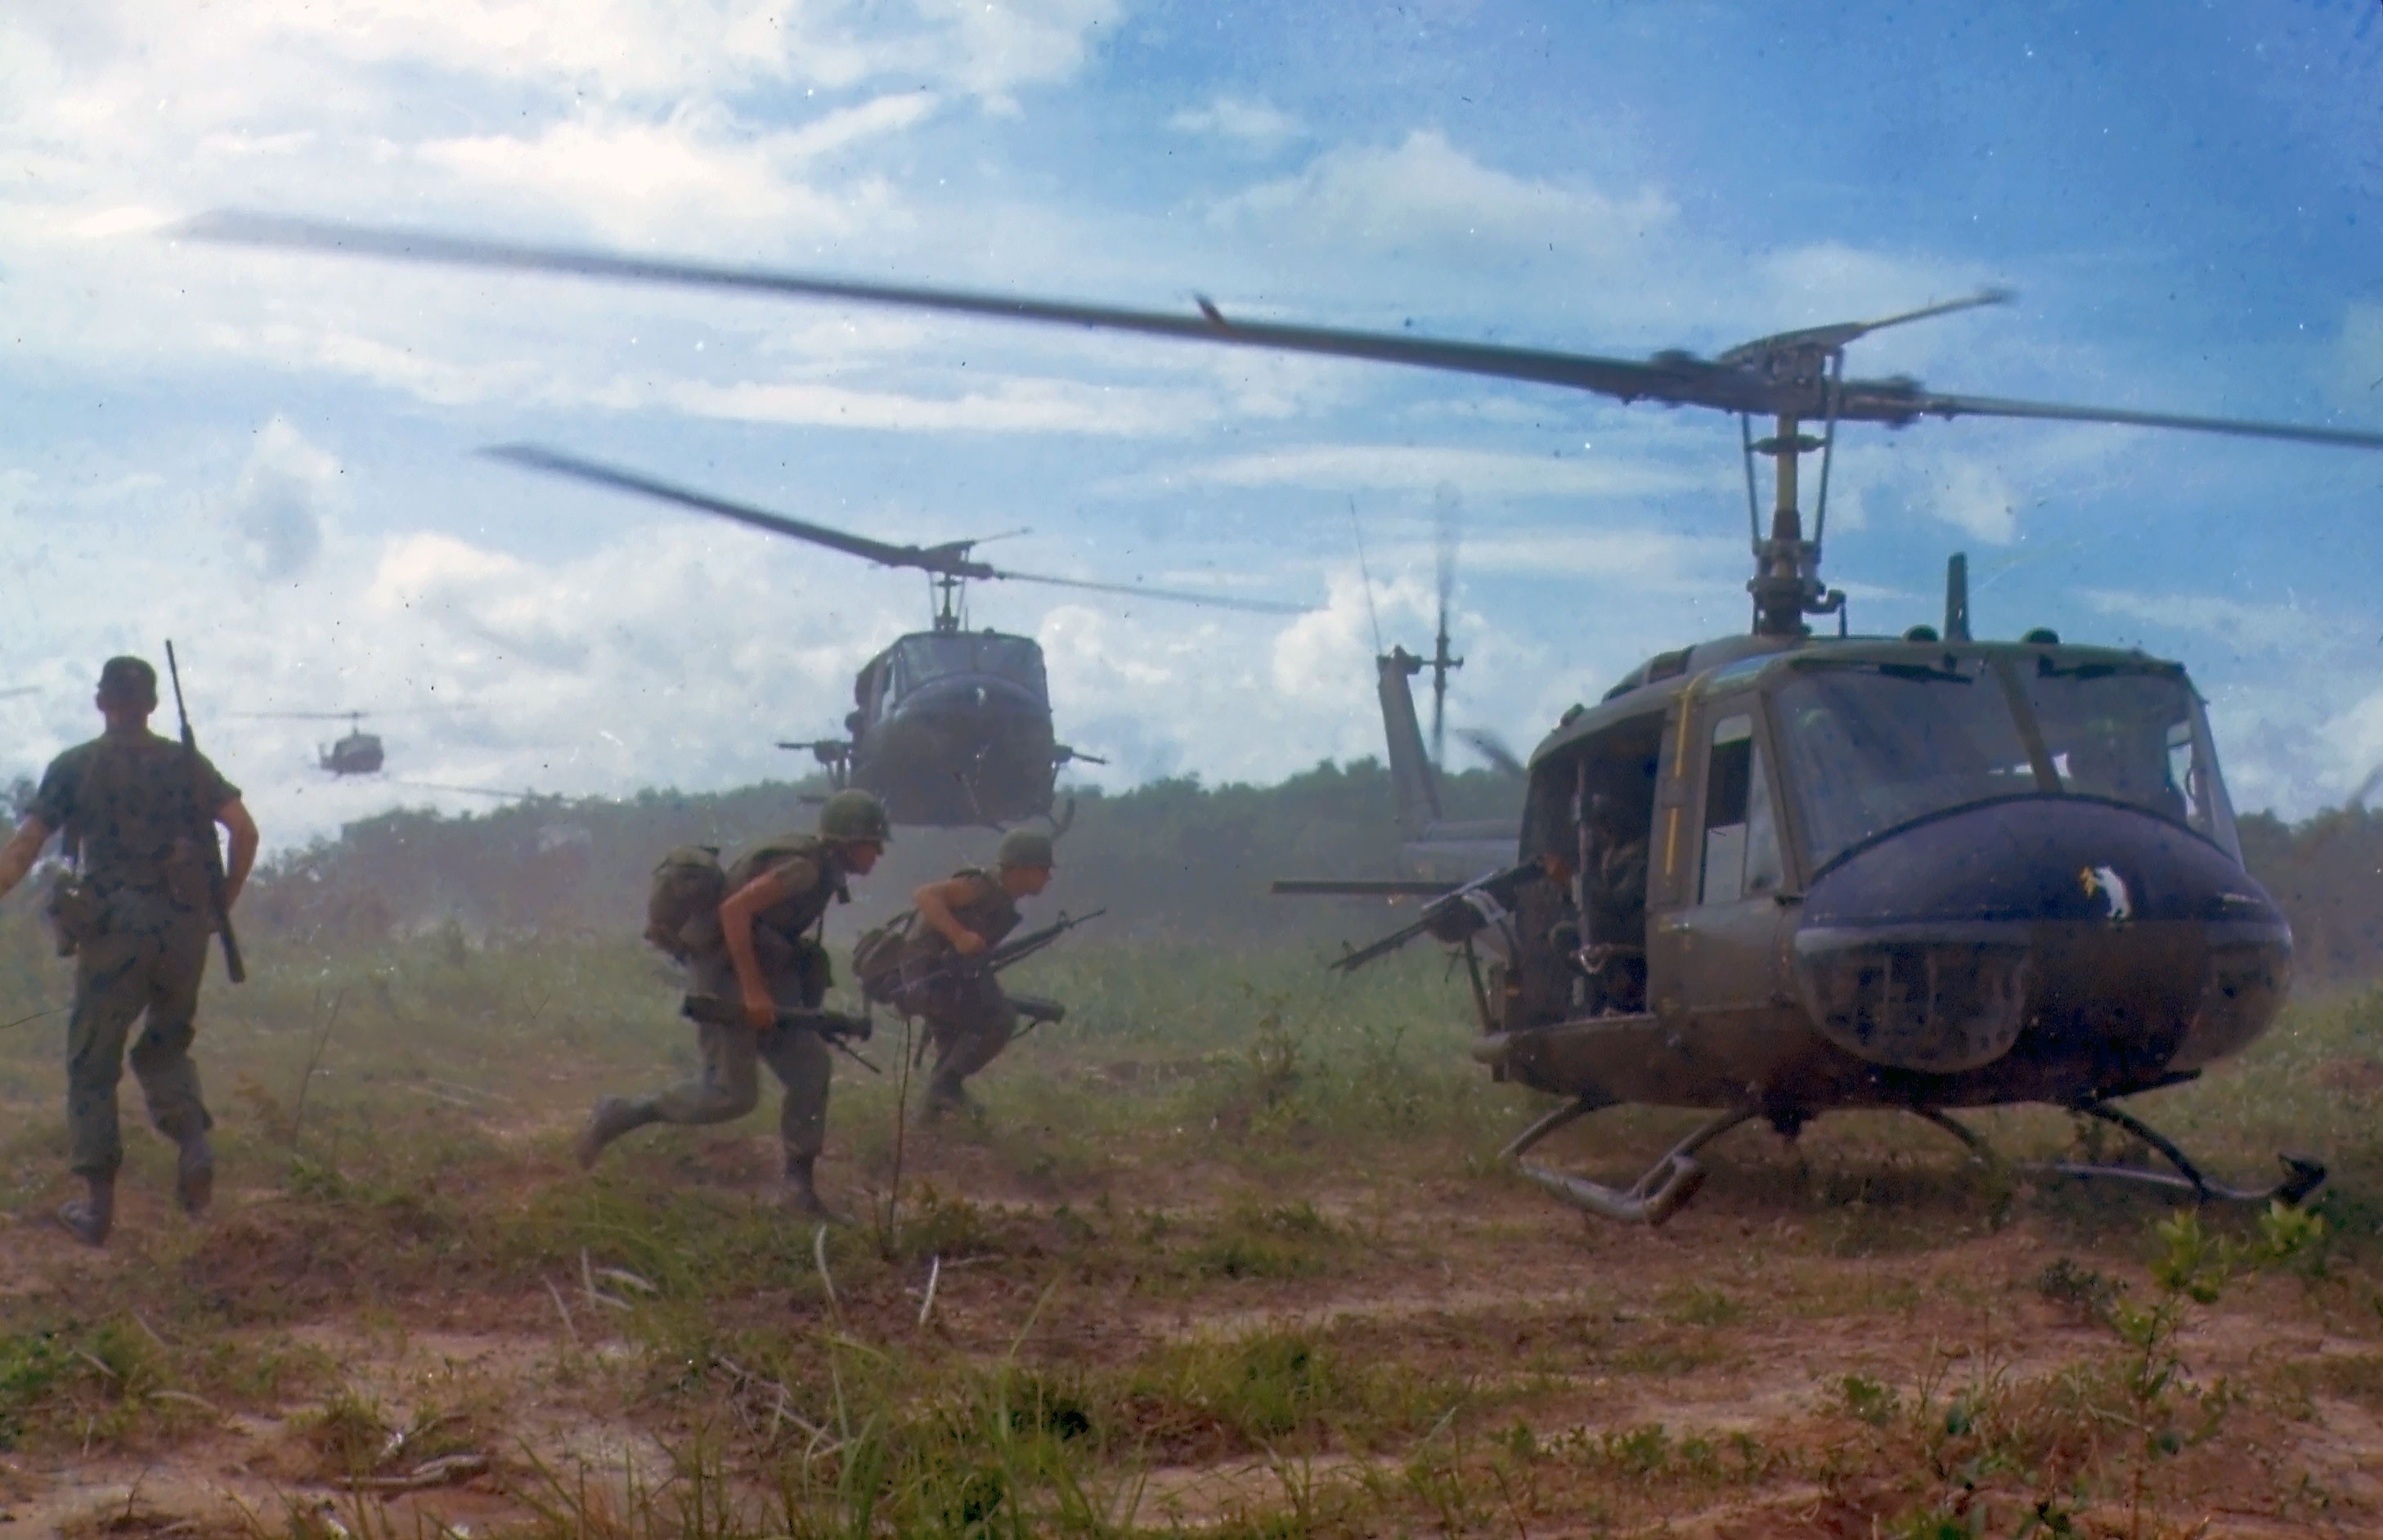 2914x1883 ... wallpaper, soldiers, destruction, 1966, cool photo, helicopters,  victims, troop, rotorcraft, infantry, air force, men in uniform, vietnam war,  us army, ...